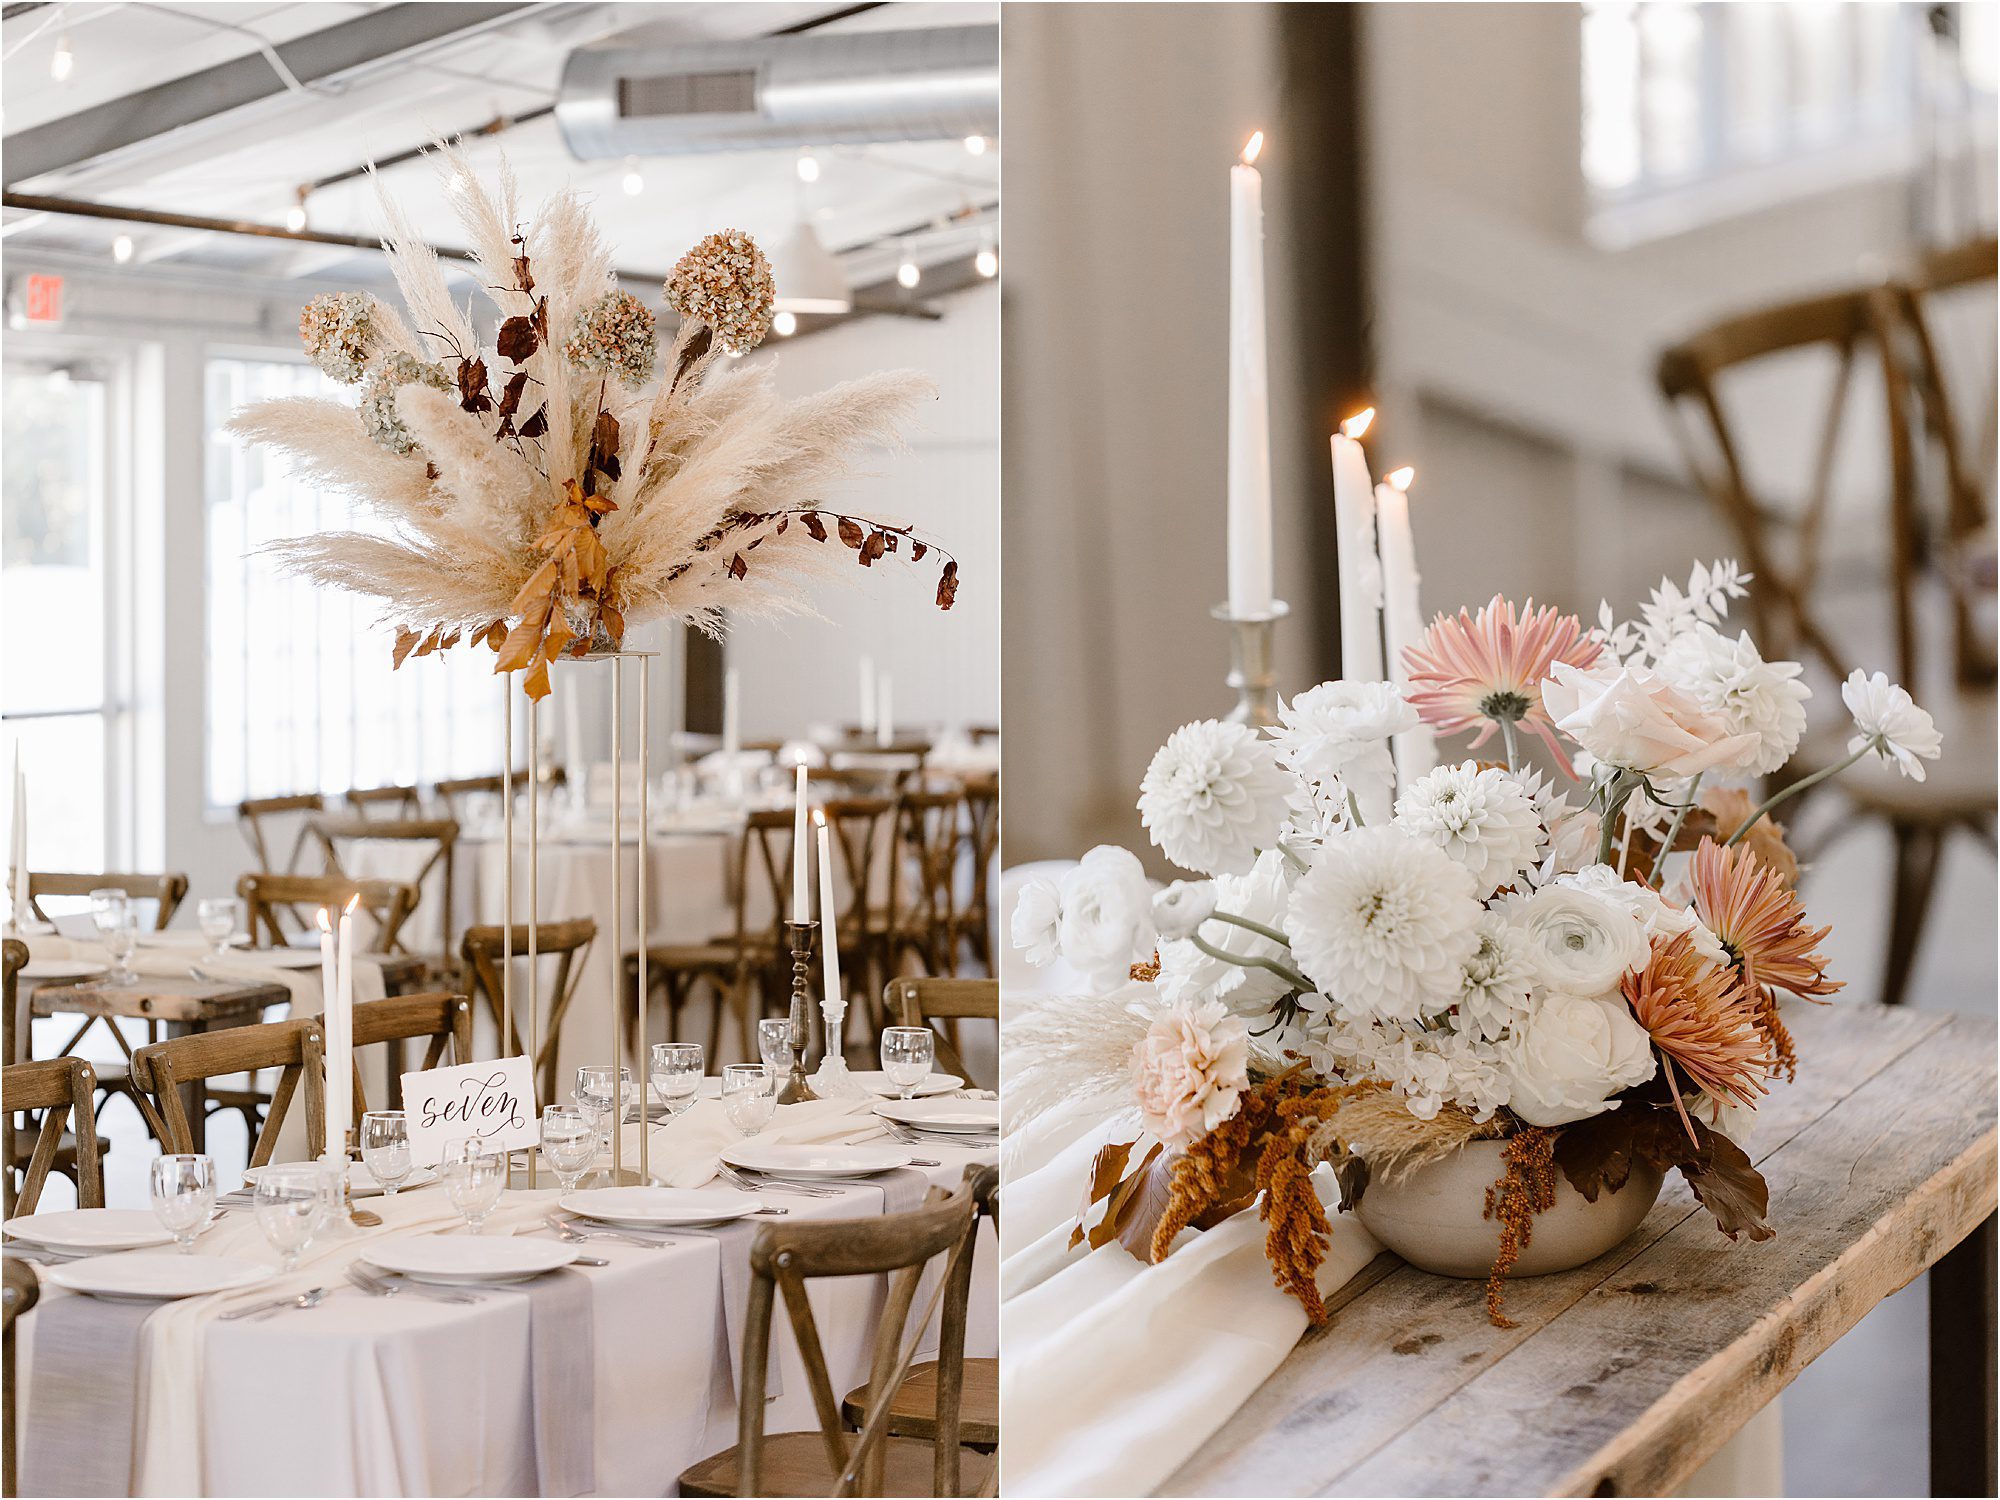 autumnal wedding reception decorations with lush flowers and pampas grass decorations